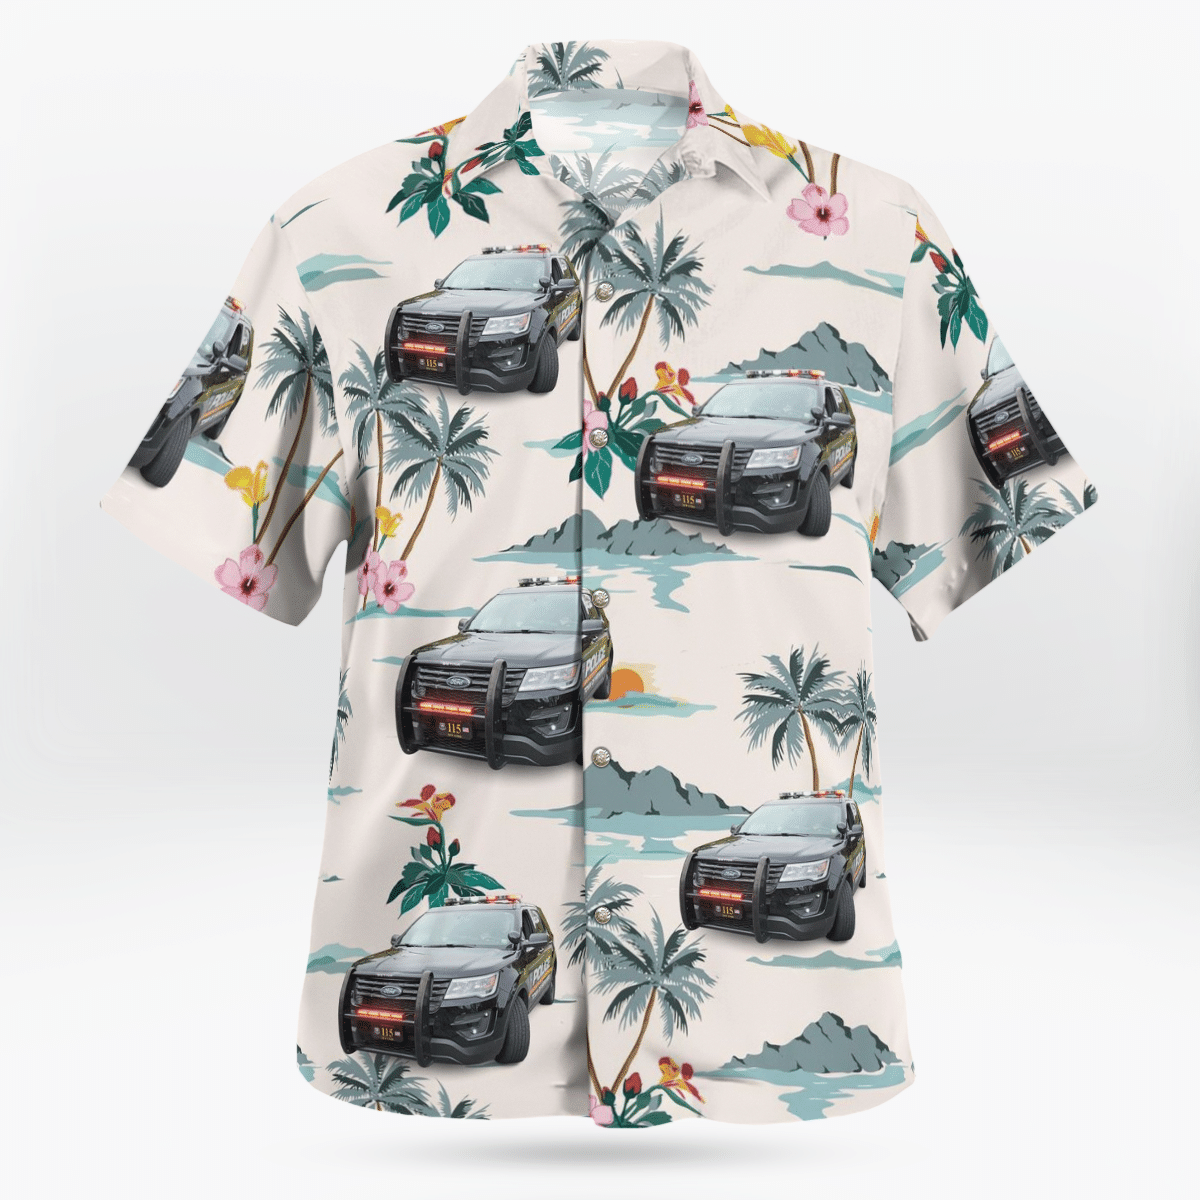 Hawaiian shirts never go out of style 272